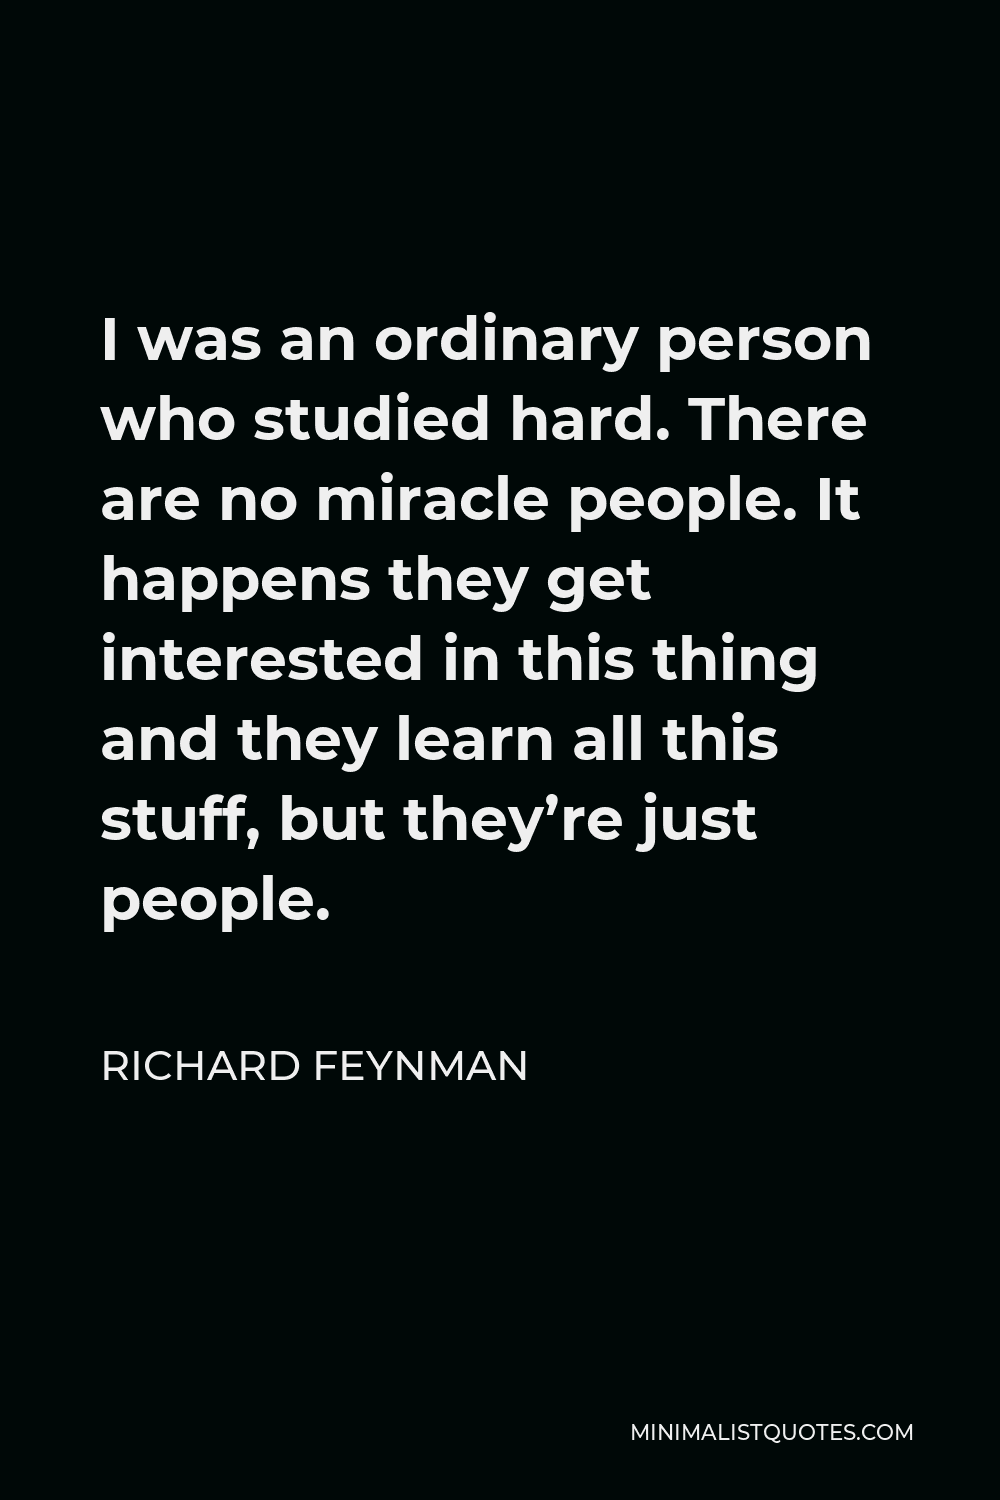 Richard Feynman Classroom POSTER If I Could Explain it to the Average Person 